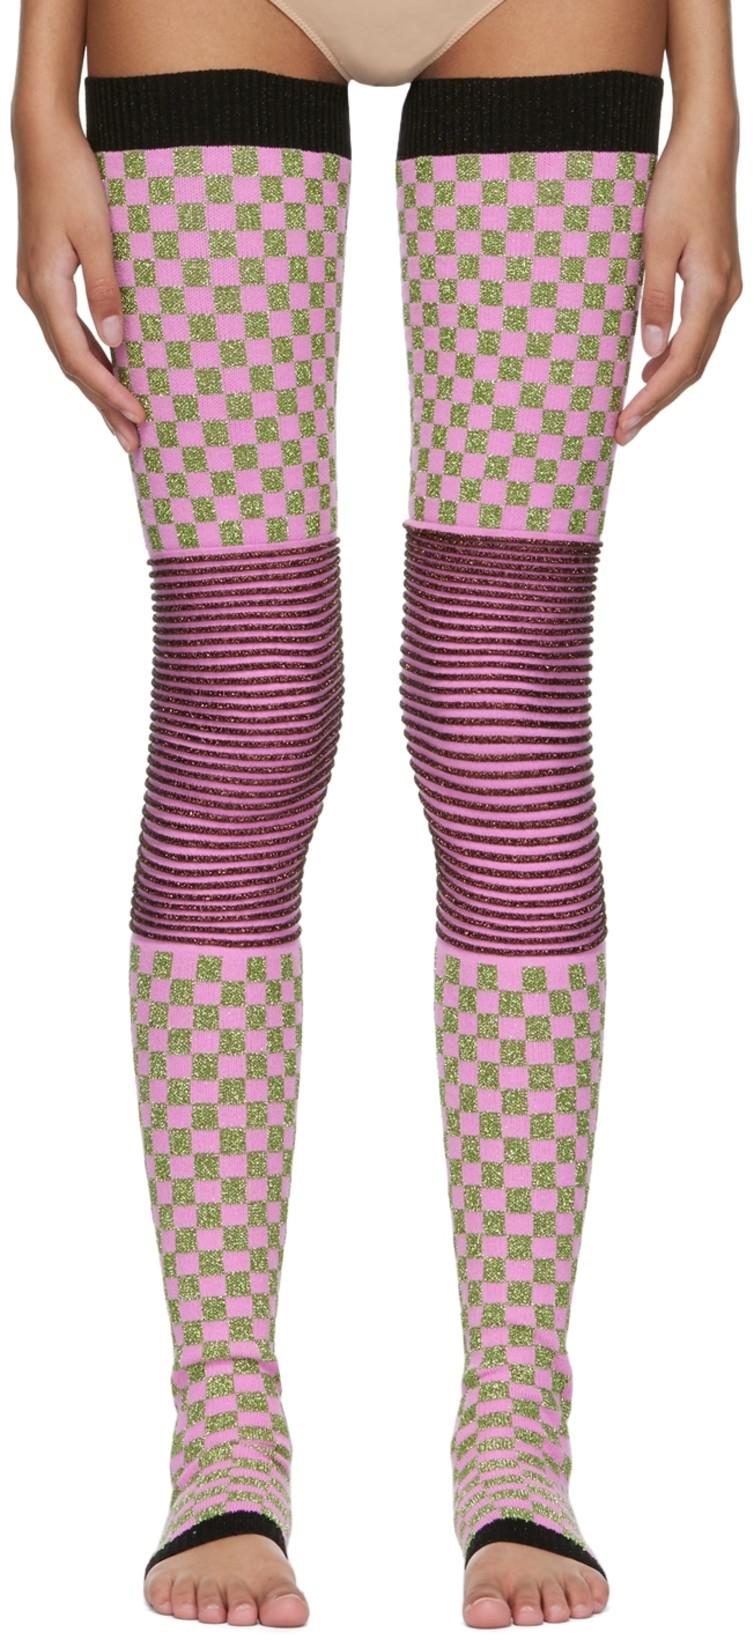 SSENSE Exclusive Pink & Green Checkered Socks by ANDREJ GRONAU